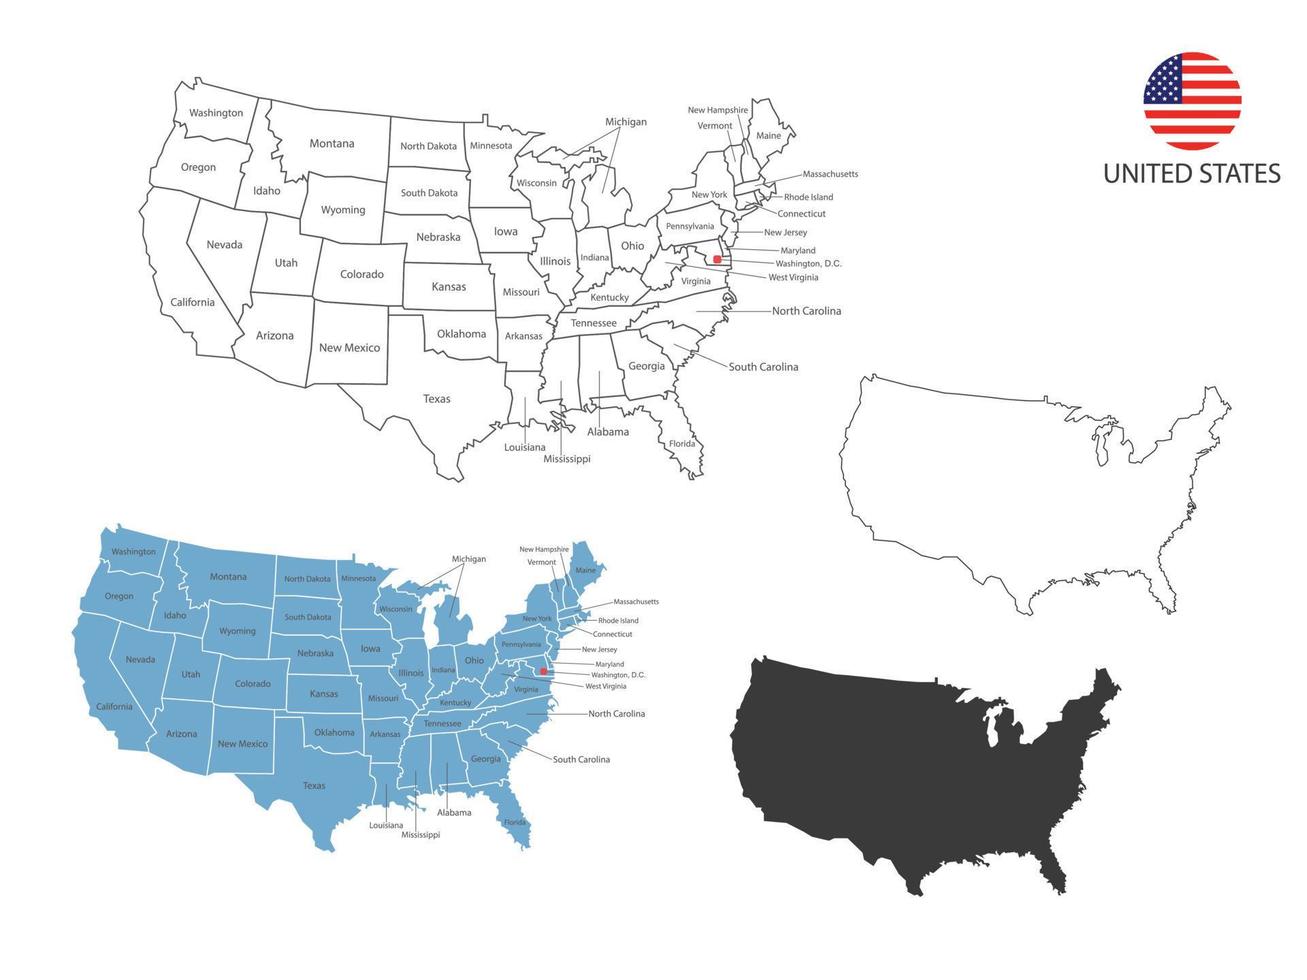 4 style of USA map vector illustration have all province and mark the capital city of USA. By thin black outline simplicity style and dark shadow style. Isolated on white background.